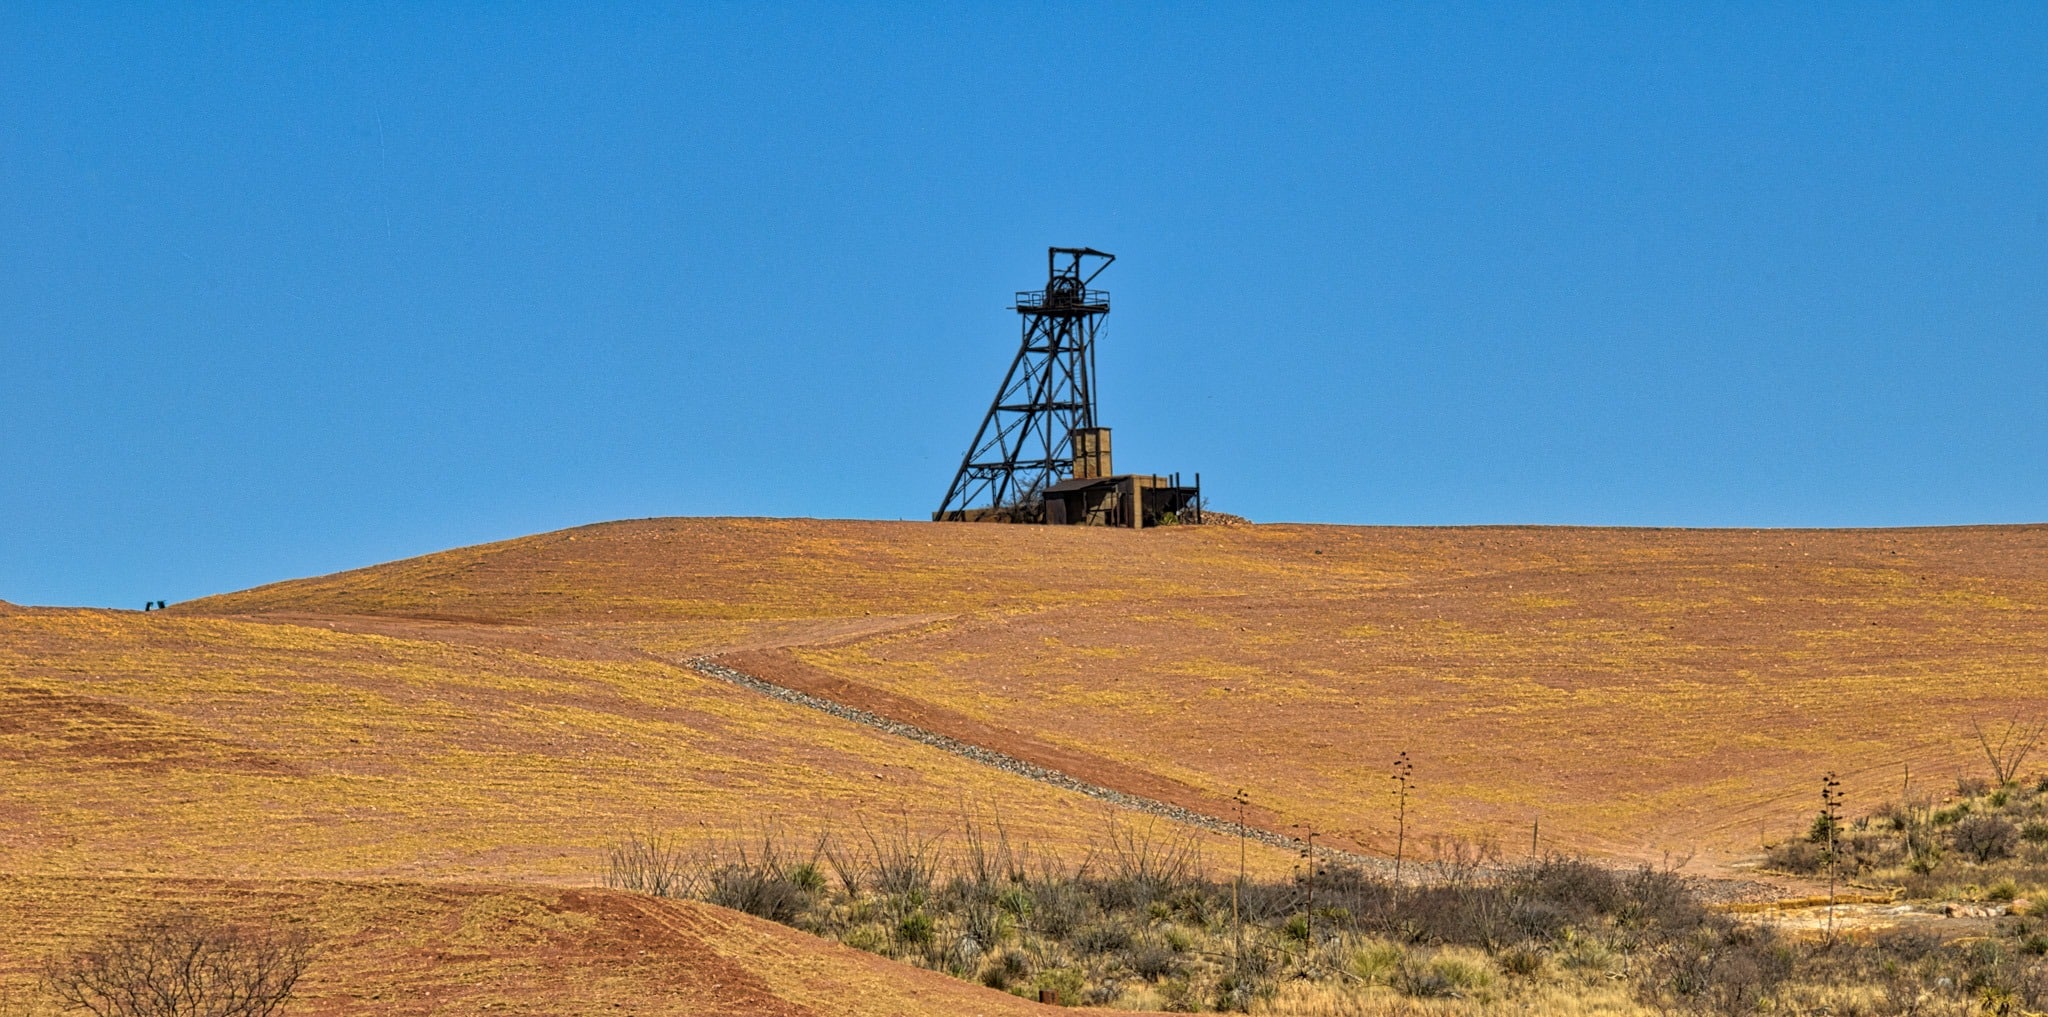 This headframe for the Cole Mine can be seen from Highway 92, just outside Bisbee, Arizona.